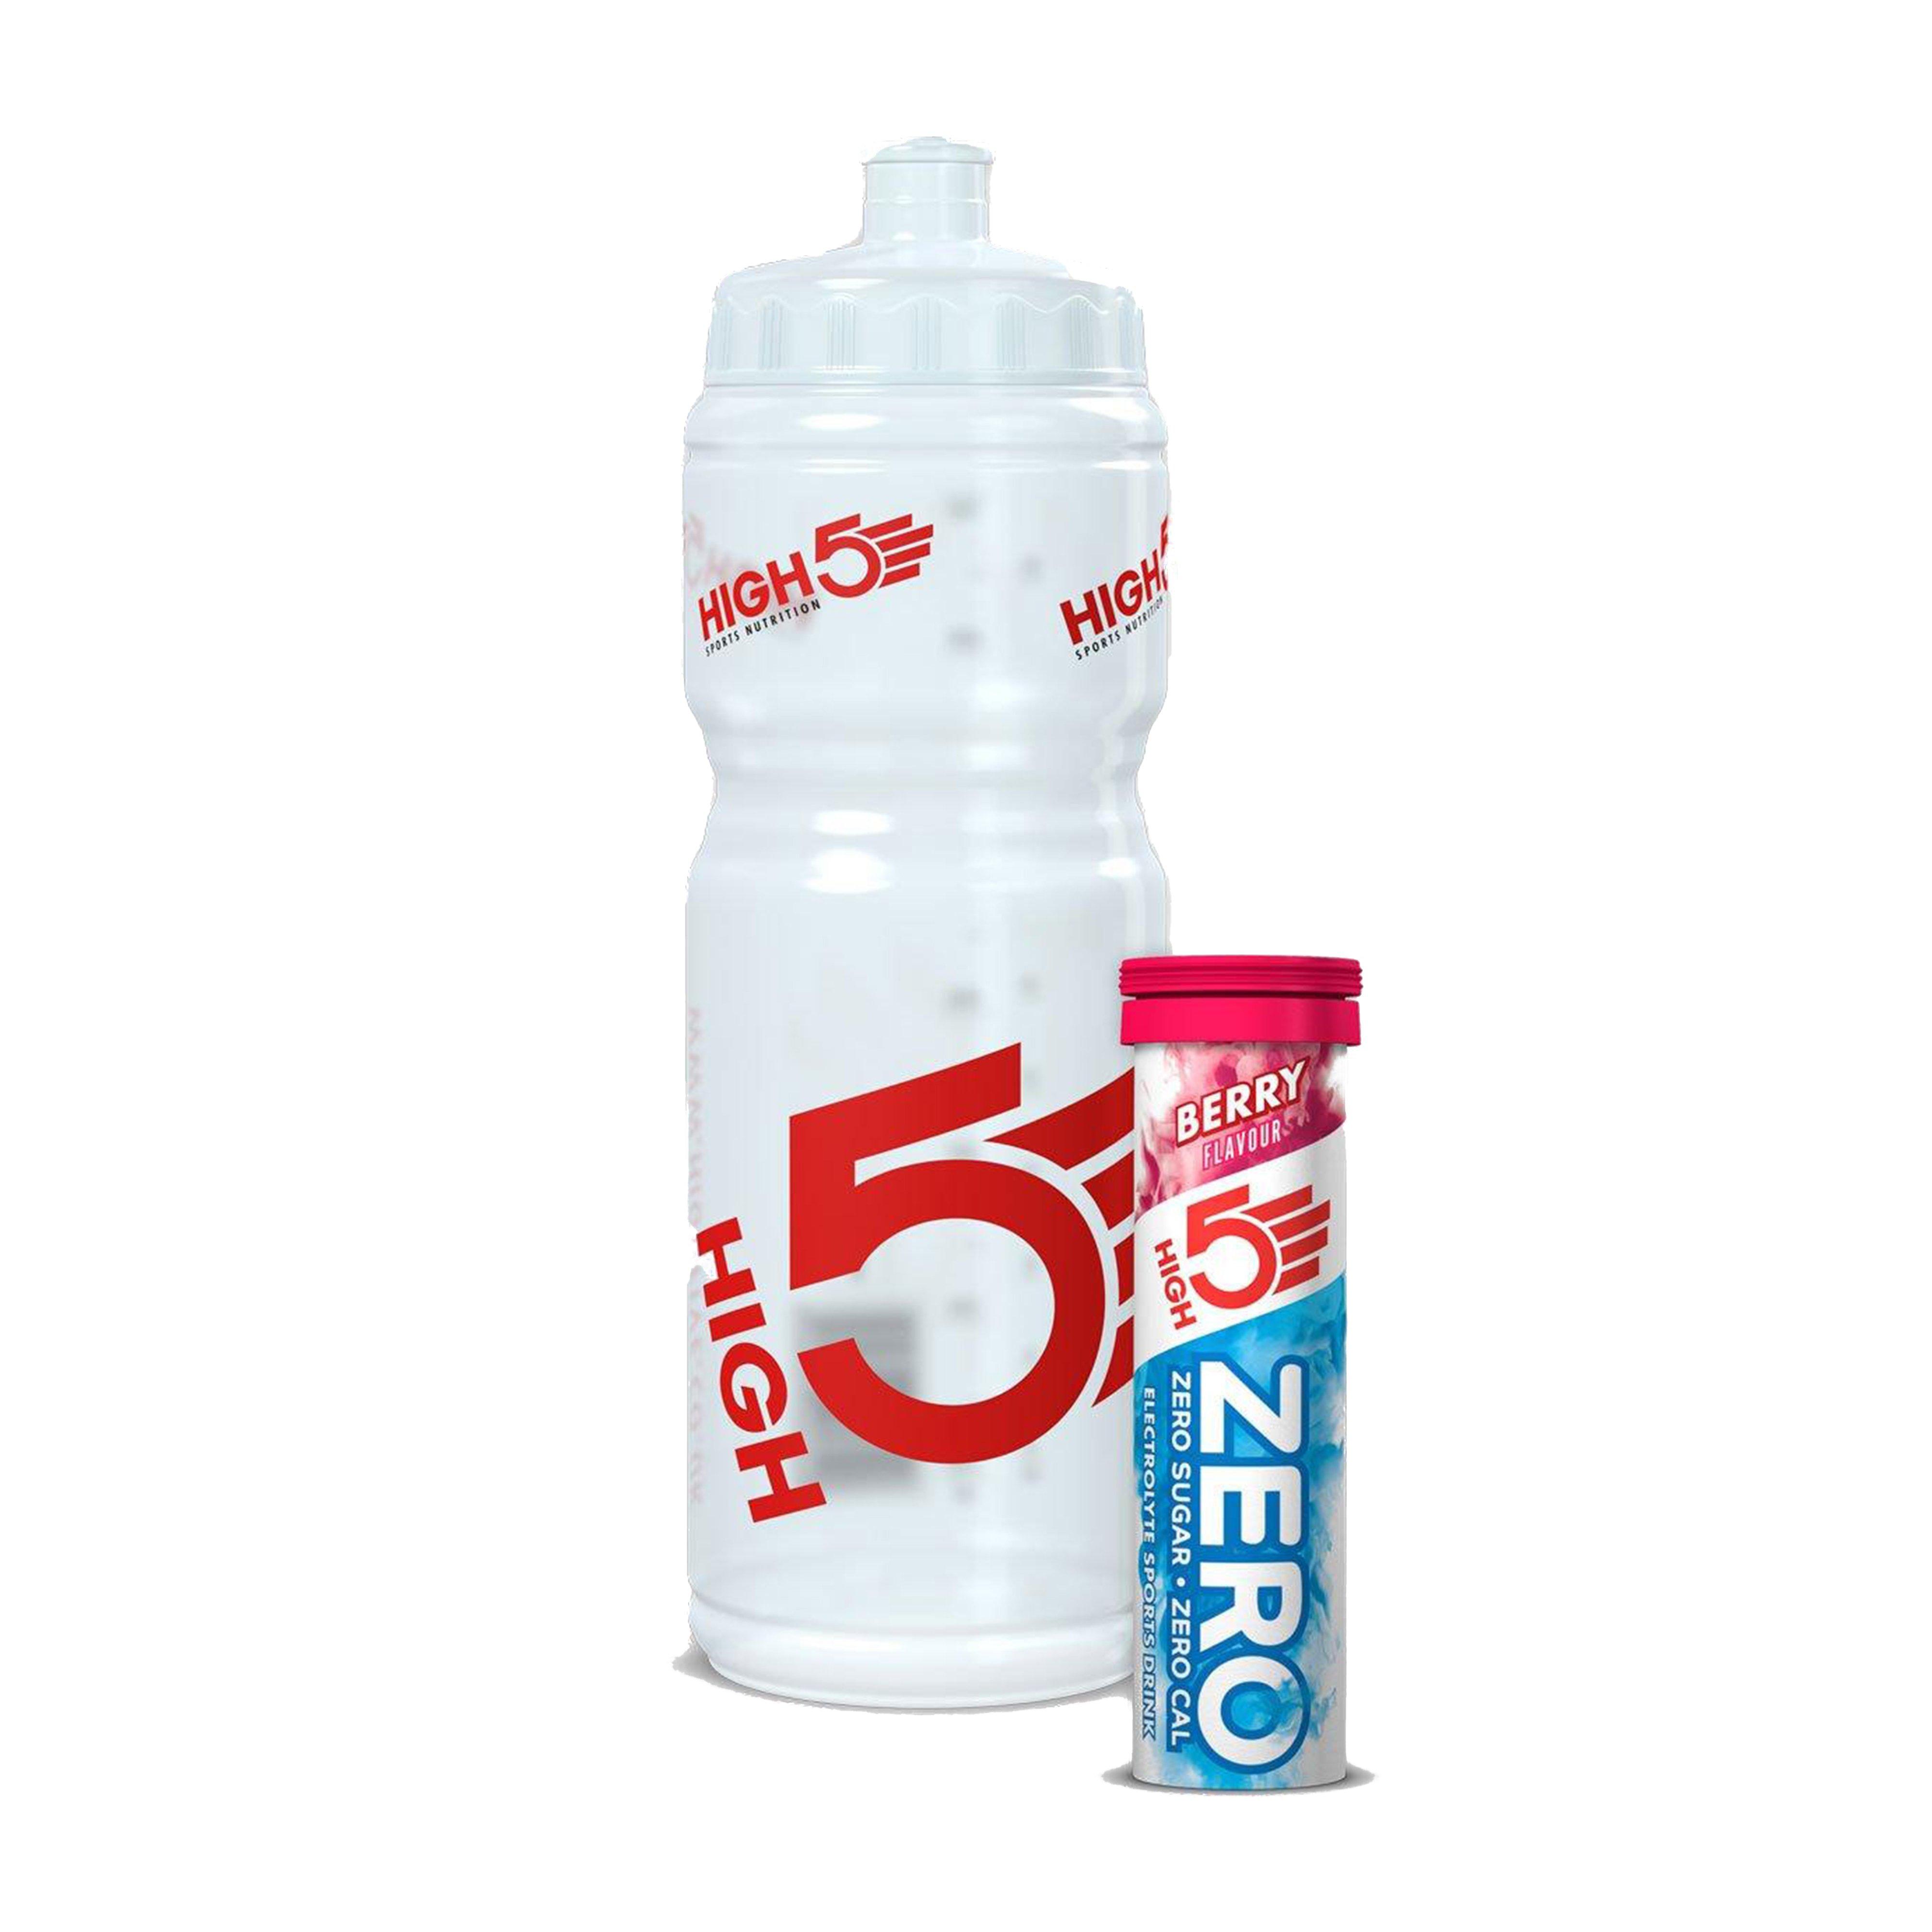 High5 750ml Drinks Bottle with 10 ZERO Tabs (Berry) Review